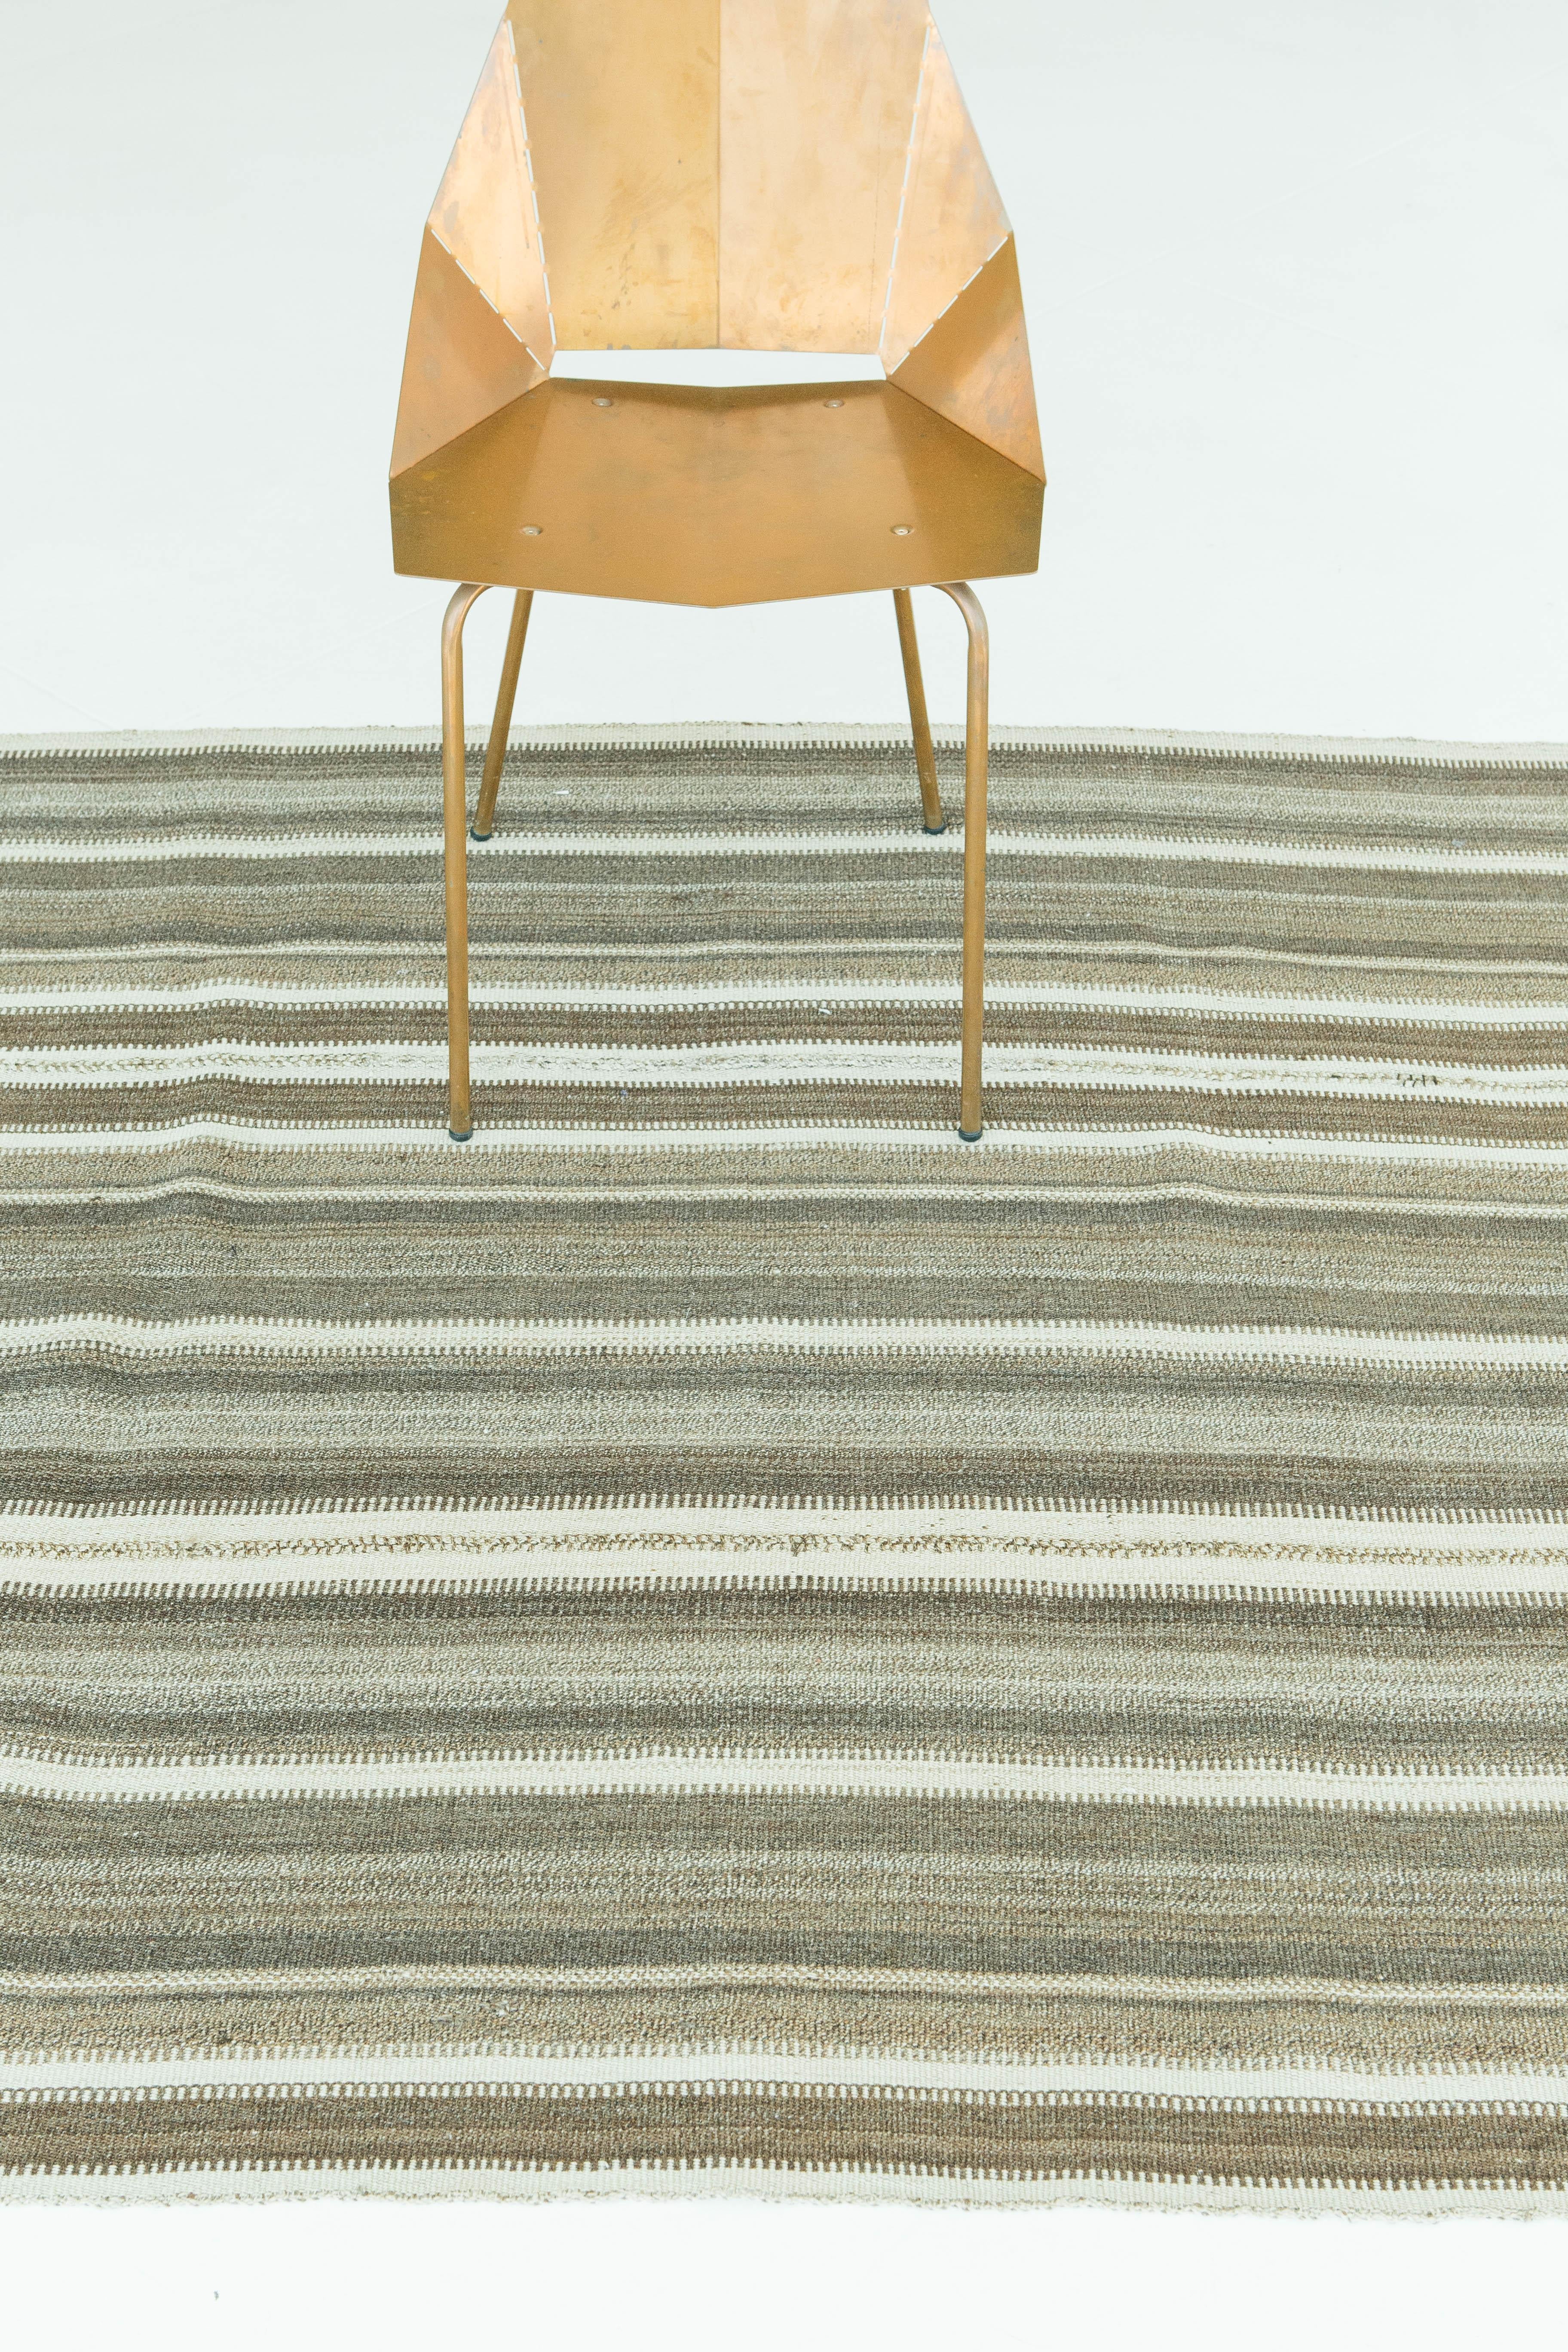 A vintage Anatolian Turkish flat-weave Kilim. This piece is the epitome of natural elegance. Its brown and ivory colors and toothing detailing alongside the rug's stripe pattern creates a simple yet interesting design. This flat-weave's interesting